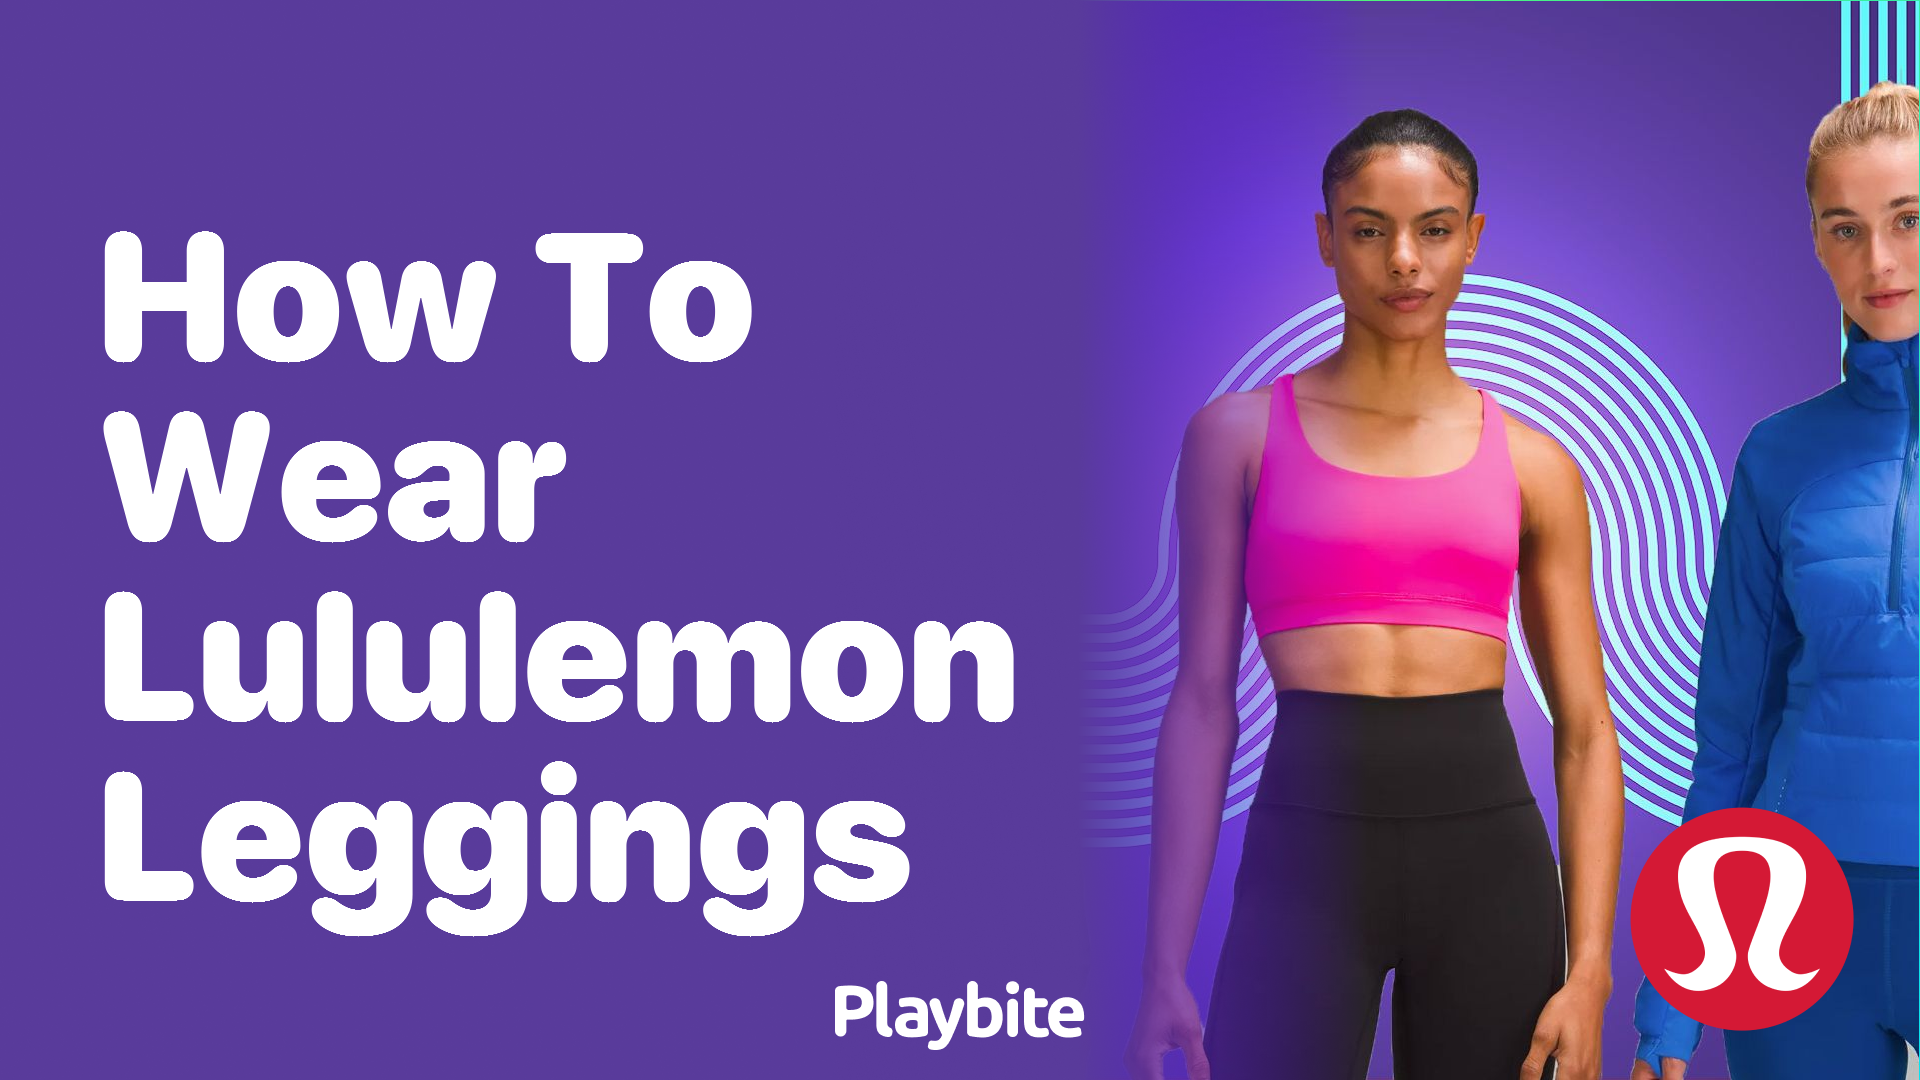 How to Wear Lululemon Leggings for Maximum Style and Comfort